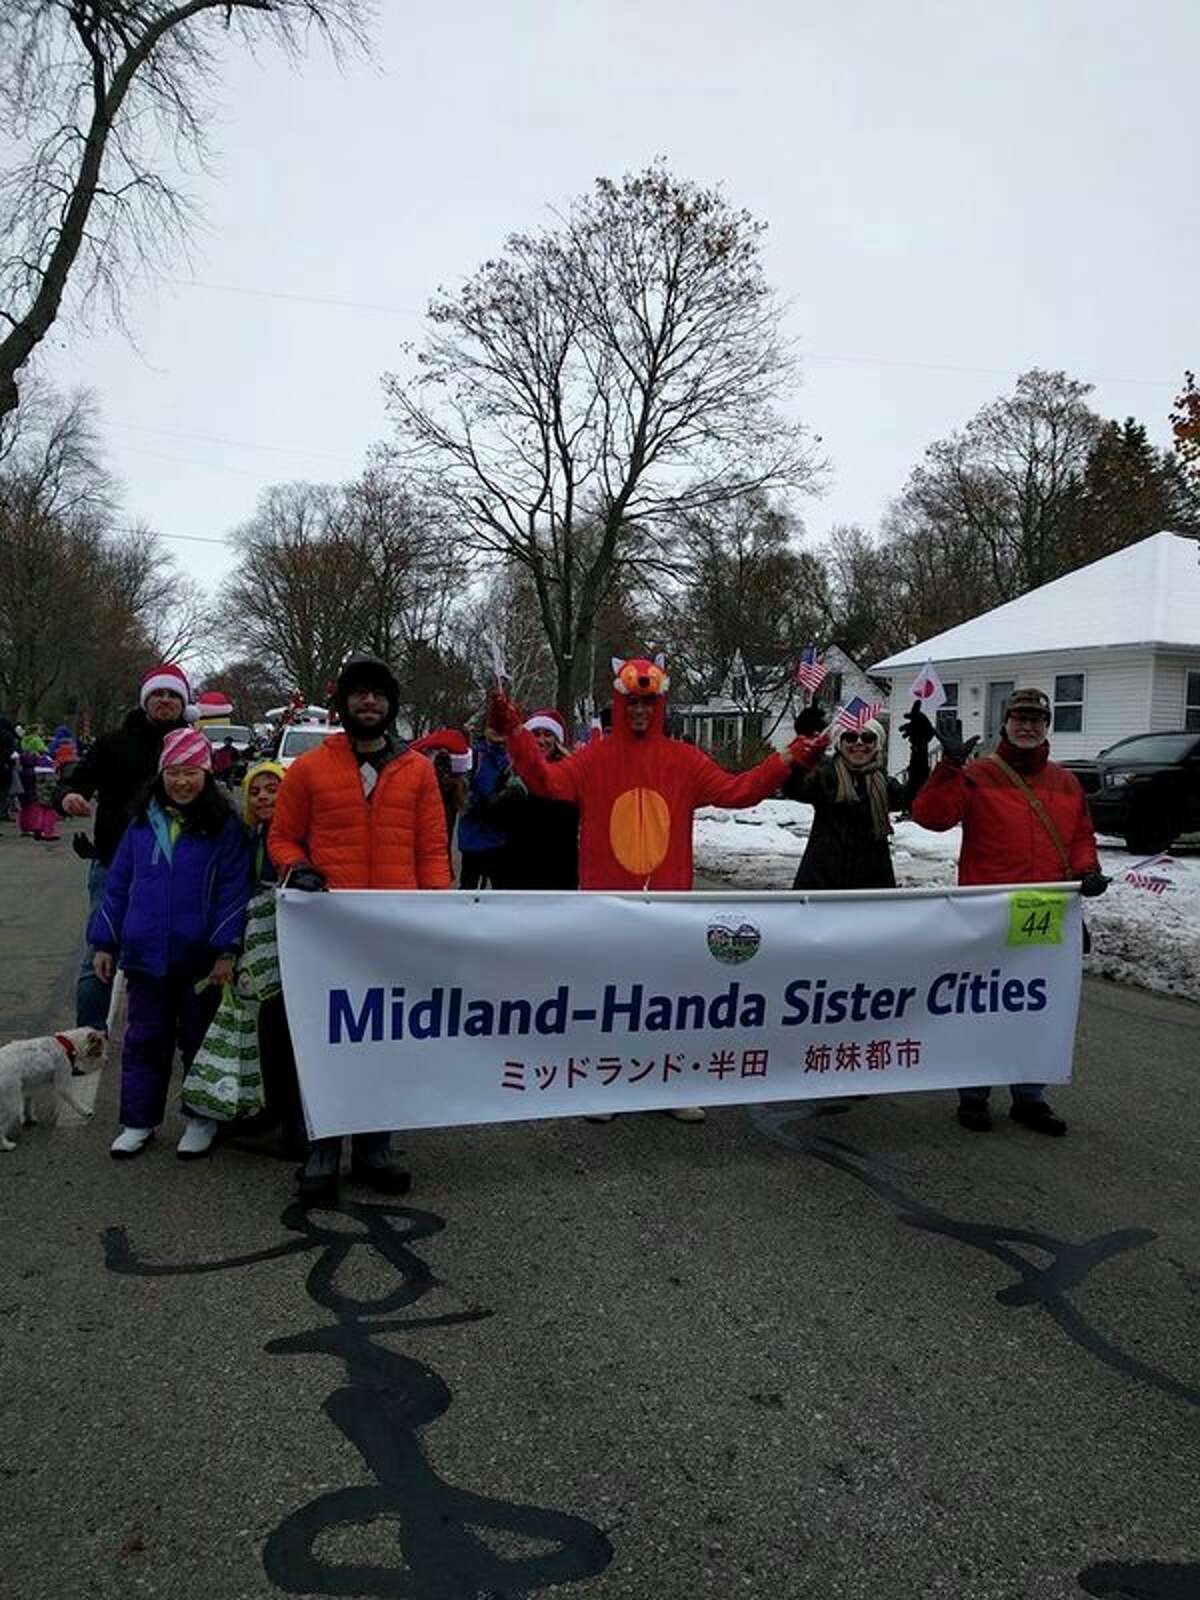 Members of the Midland-Handa Sister City committee march in Midland's Santa Parade on Nov. 27, 2018. (Photo courtesy of John Metcalf)